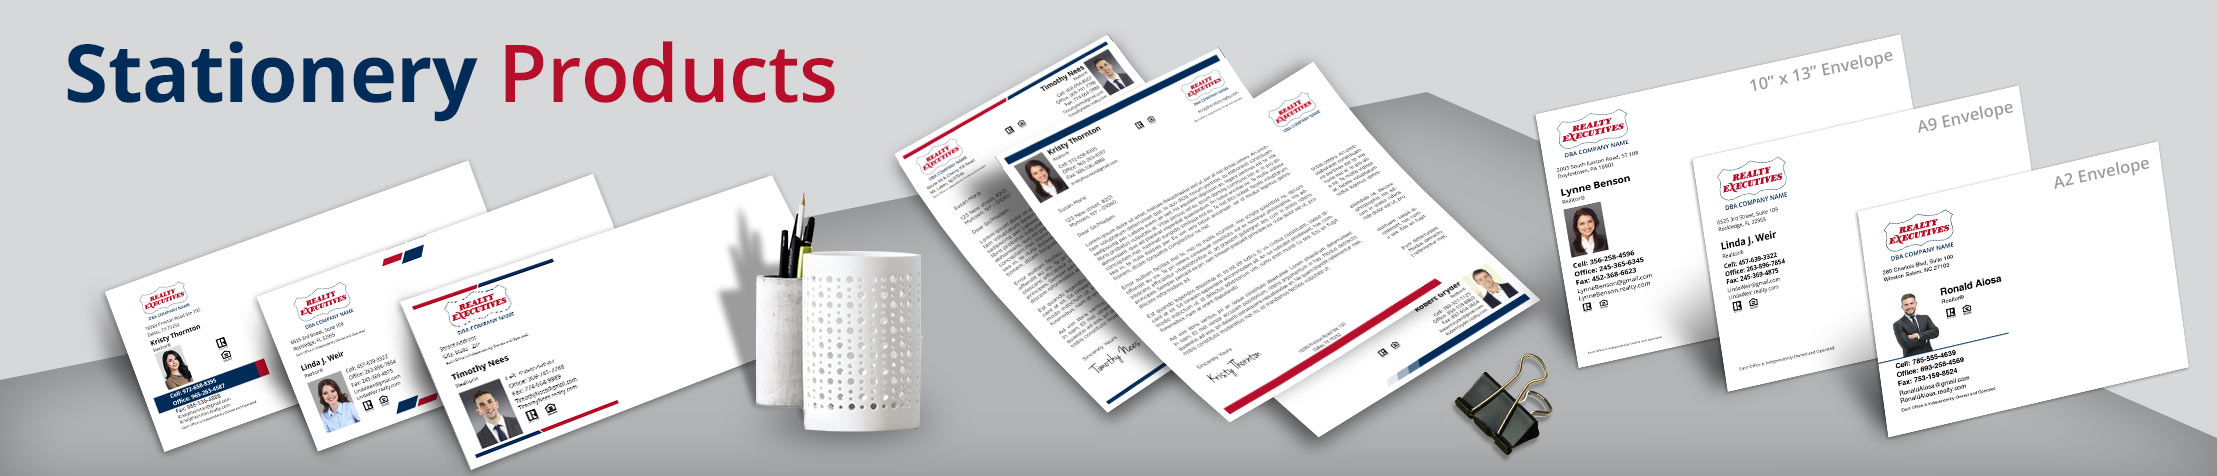 Realty Executives Real Estate Stationery Products - Custom Letterhead & Envelopes Stationery Products for Realtors | BestPrintBuy.com